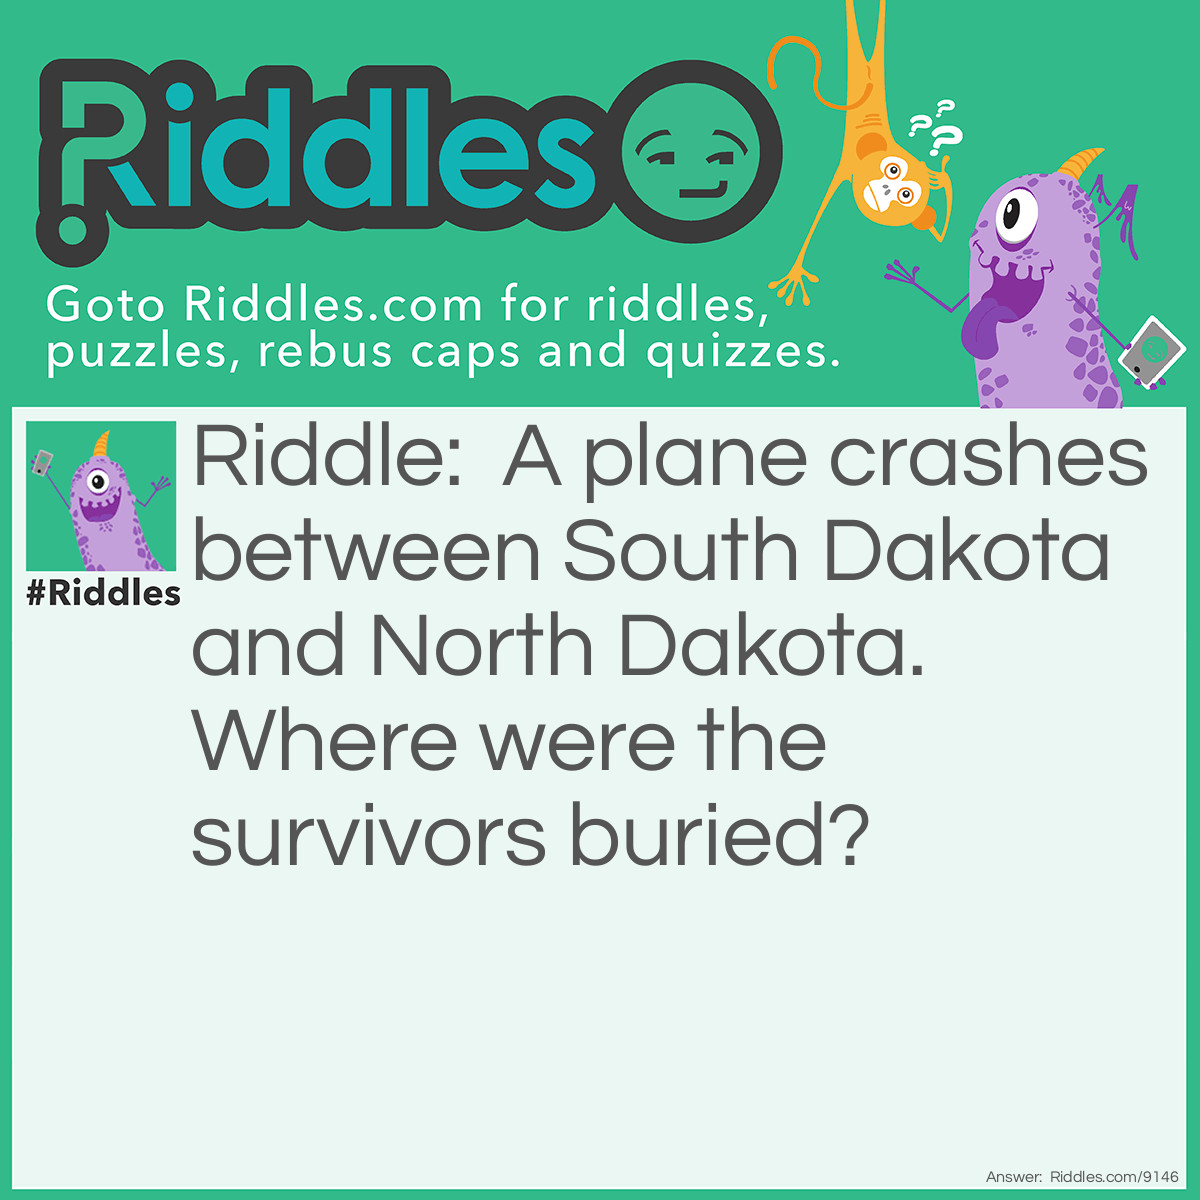 Riddle: A plane crashes between South Dakota and North Dakota. Where were the survivors buried? Answer: They’re Survivors. Why would they be buried?